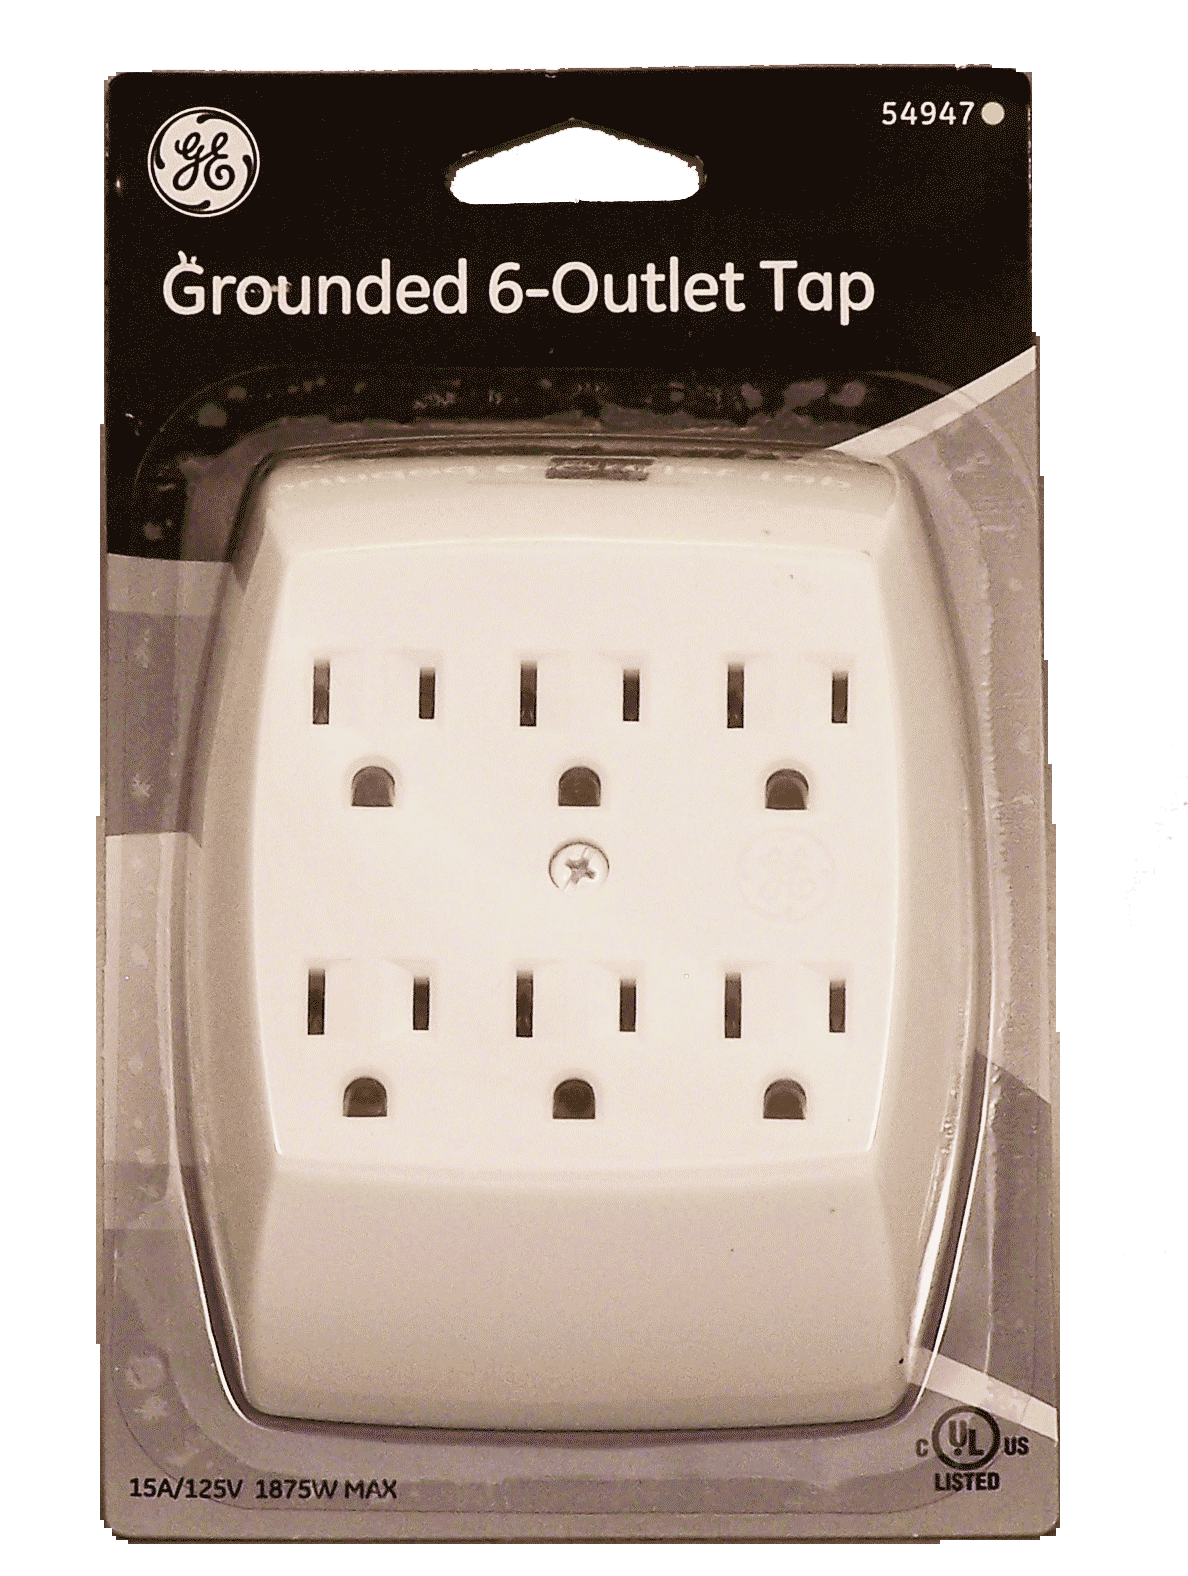 Groceries-Express.com Product Infomation for General Electric grounded 6-outlet tap" 4318056633